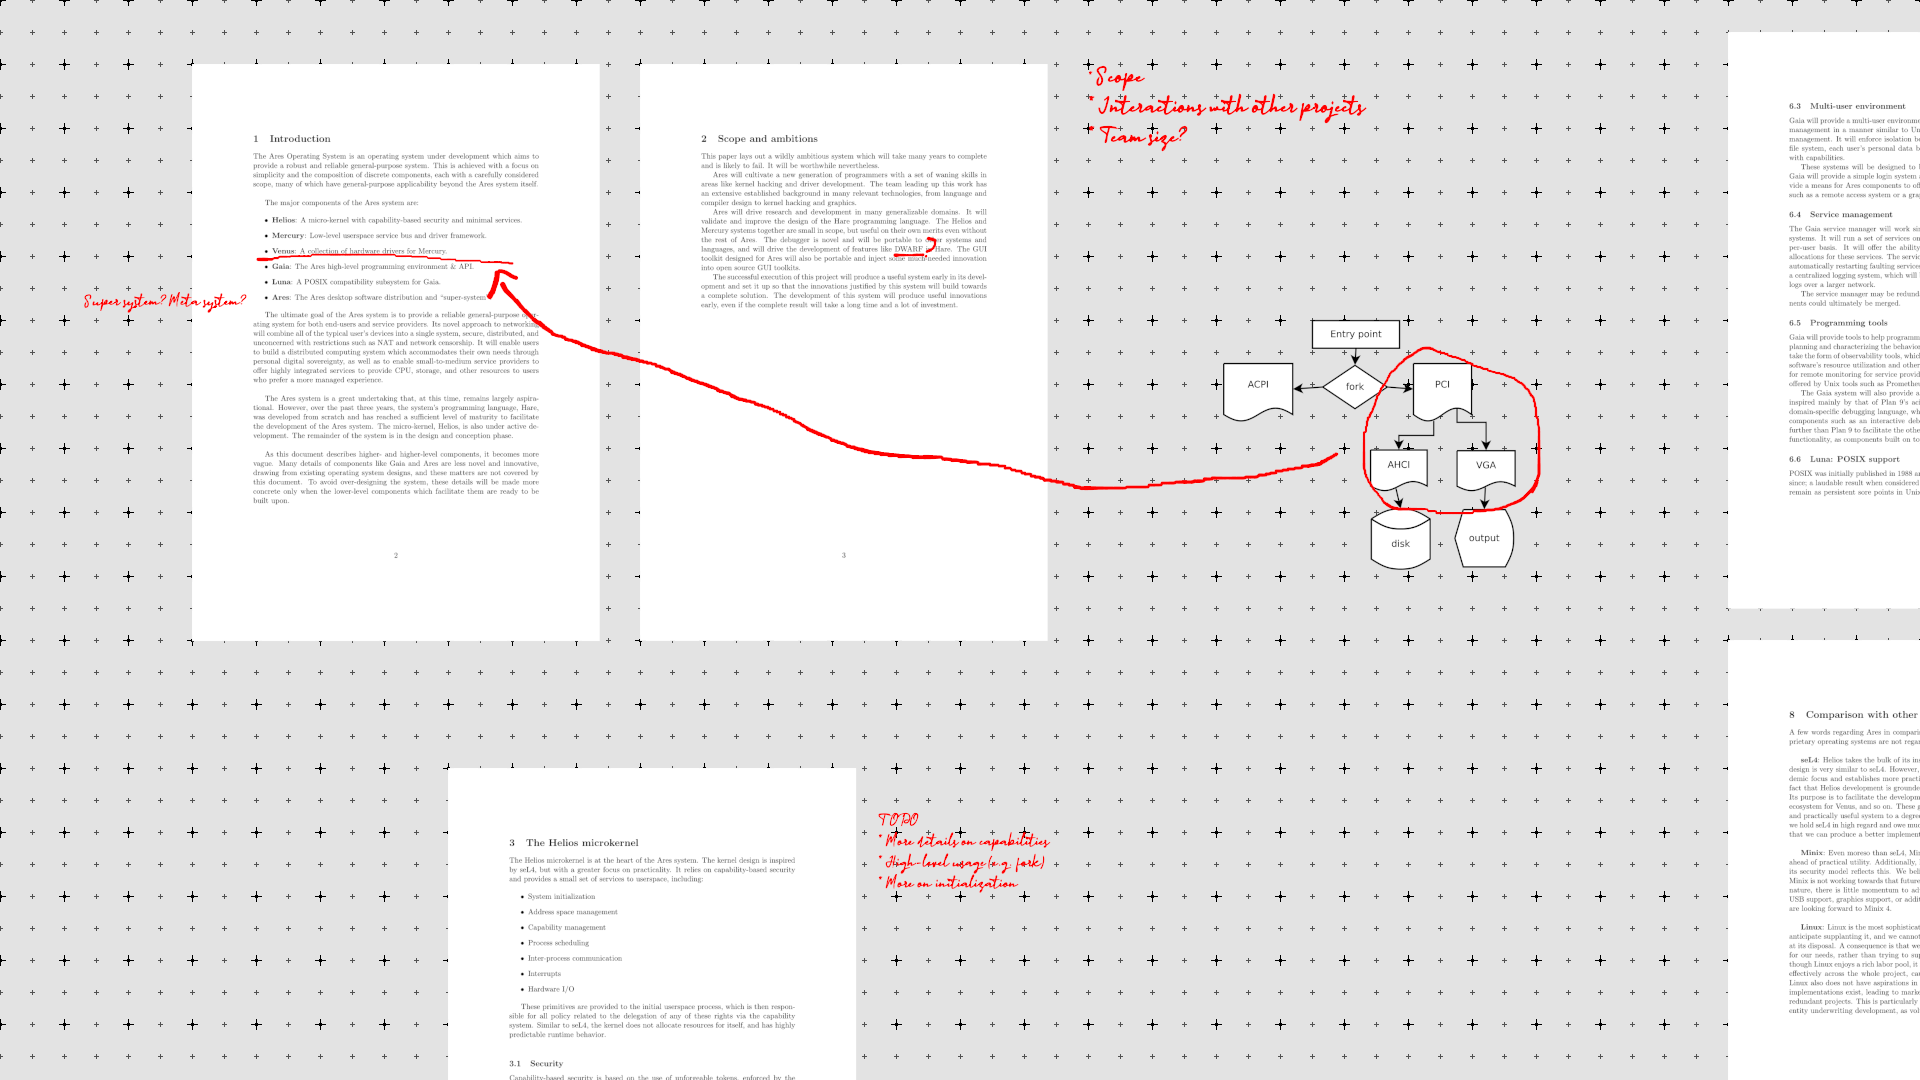 A mock-up of an application. A4 pages are arranged ad-hoc on a grid.Handwritten notes and drawings appear in red across the grid and over the pages.A flowchart is shown outside of a page.